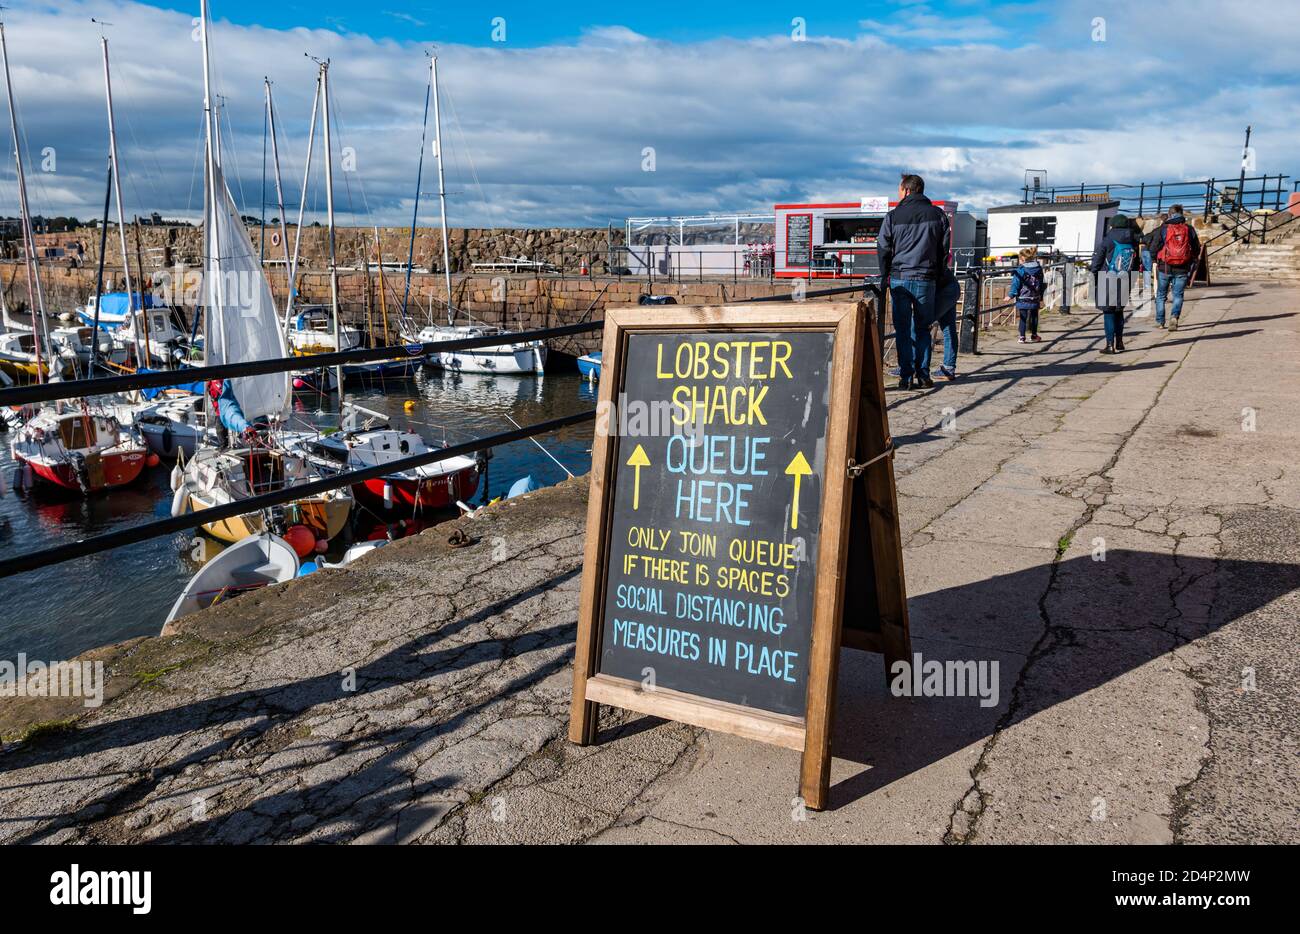 North Berwick, East Lothian, Scotland, United Kingdom, 10th October 2020. UK Weather: The popular Lobster Shack attracts customers among the colourful sailing boats in the harbour on a windy day with a notice board advising customers to maintain social distancing in the queue Stock Photo